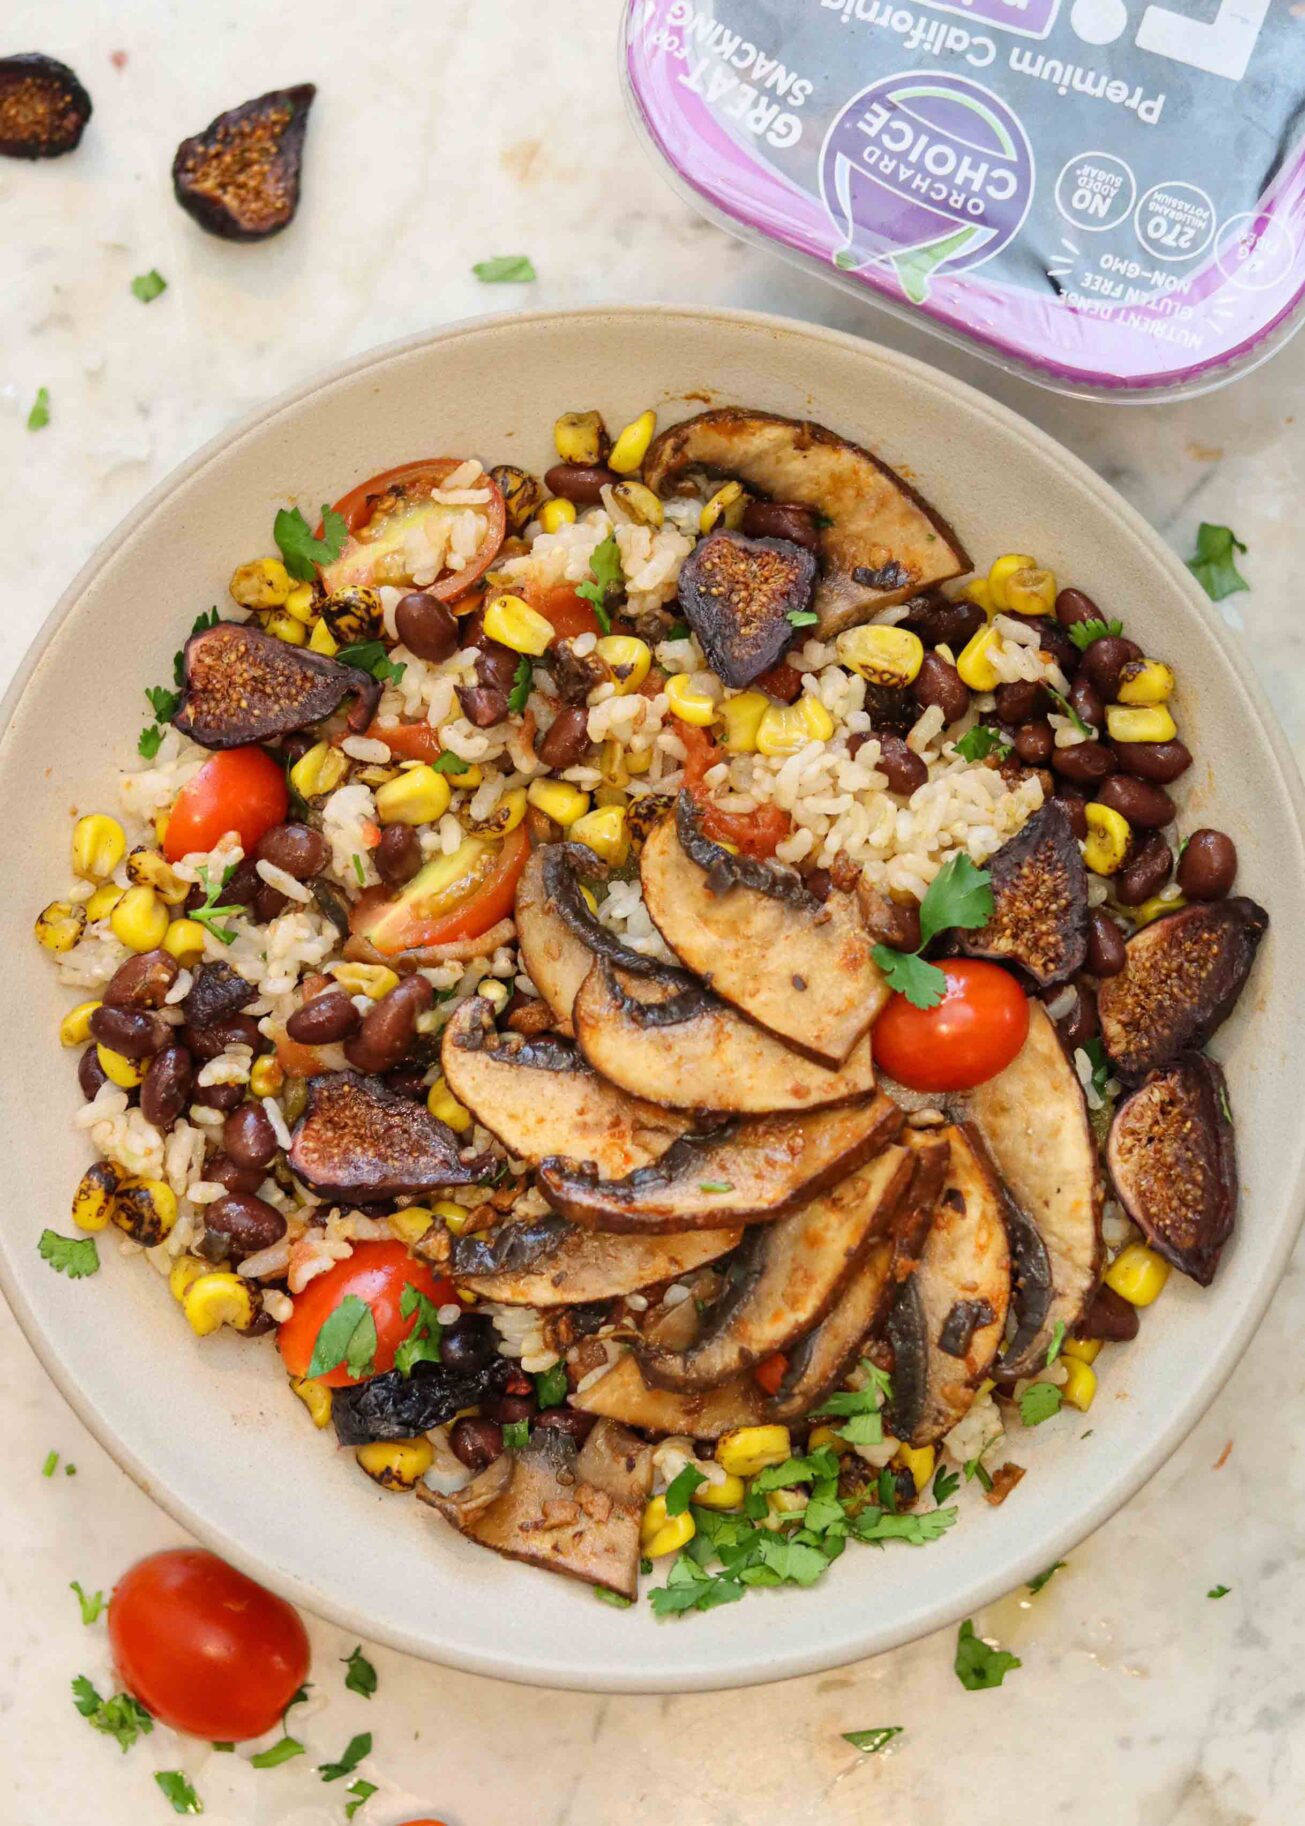 Are figs vegan? Yes! Learn about how figs fit in a vegan lifestyle from RD Anna Rios and make her recipe for mushroom veggie taco bowls with fig salsa.